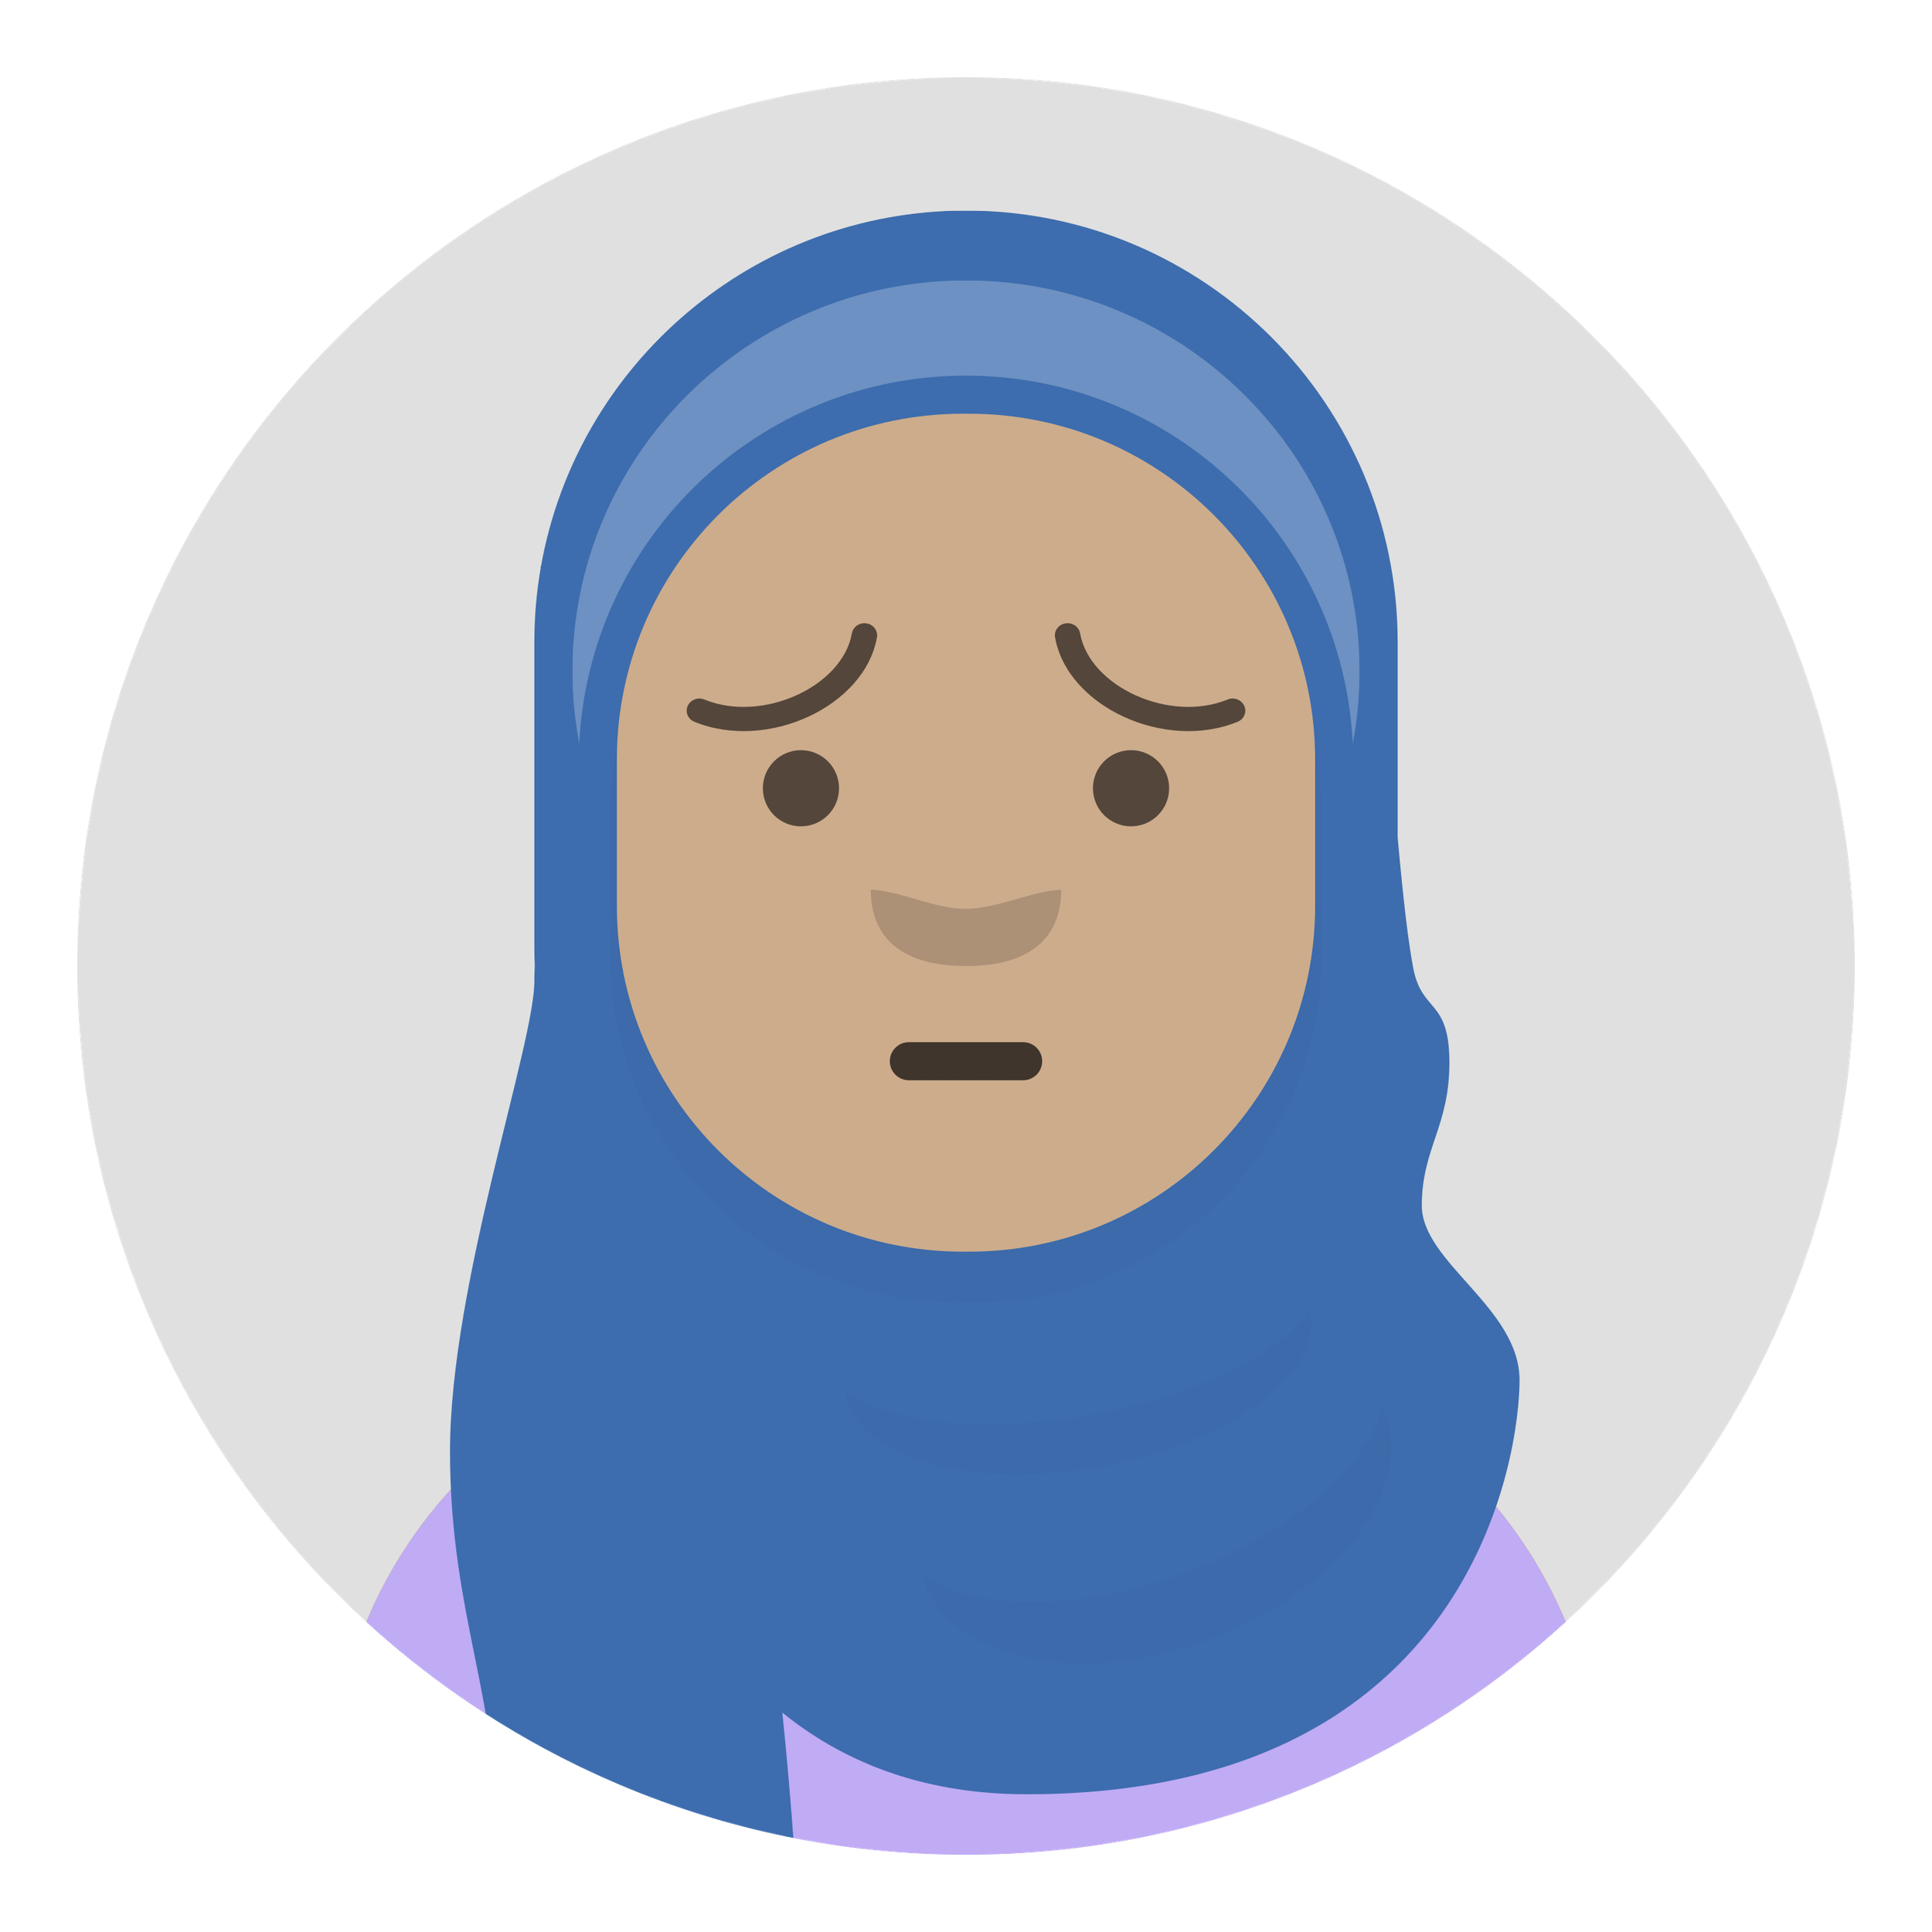 Afra, a young woman with hijab, looking worried.